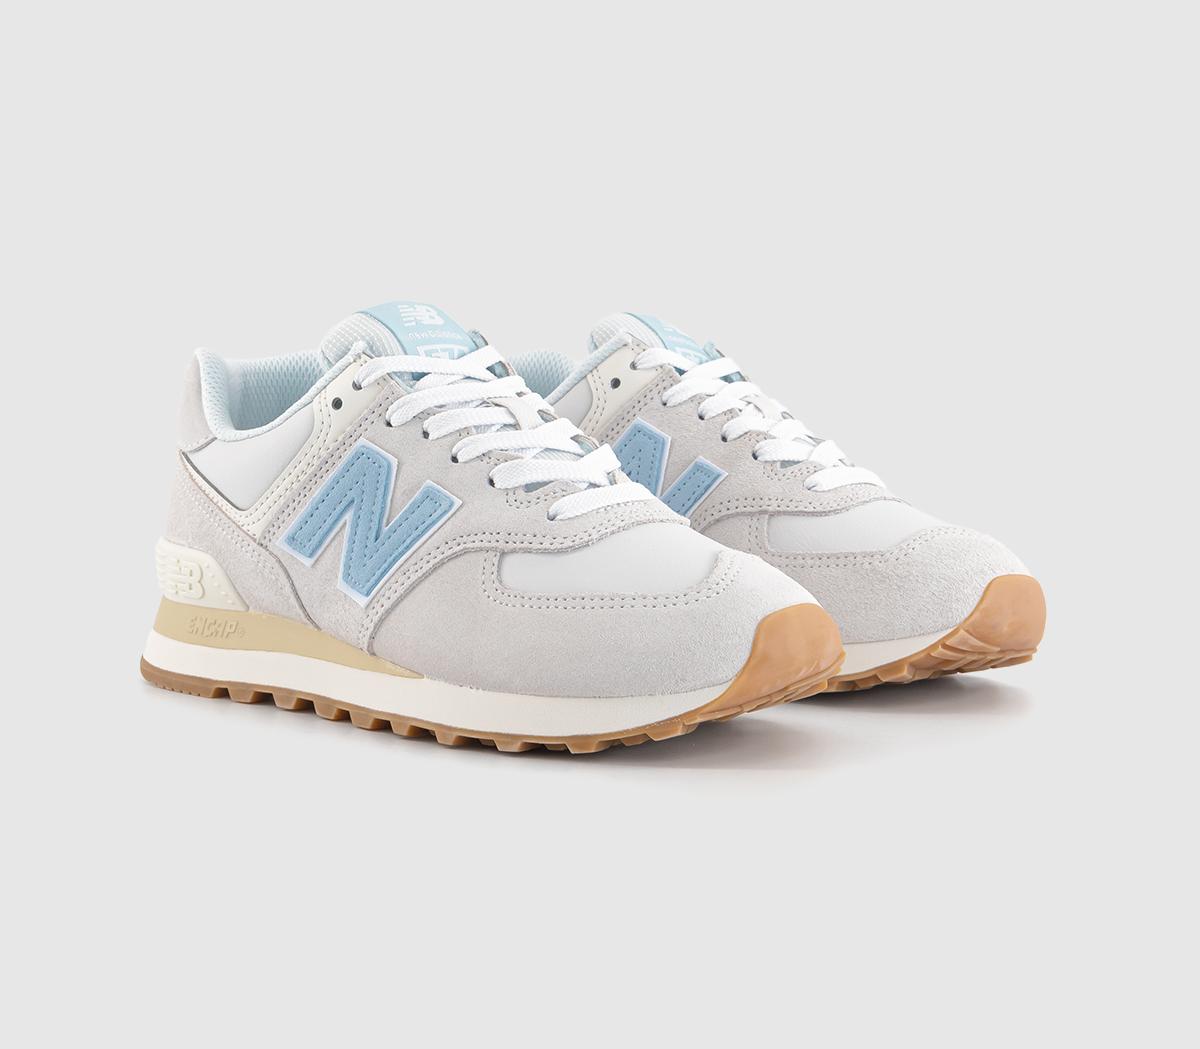 New Balance Mens 574 Trainers Reflection Cream/White/Blue, 9